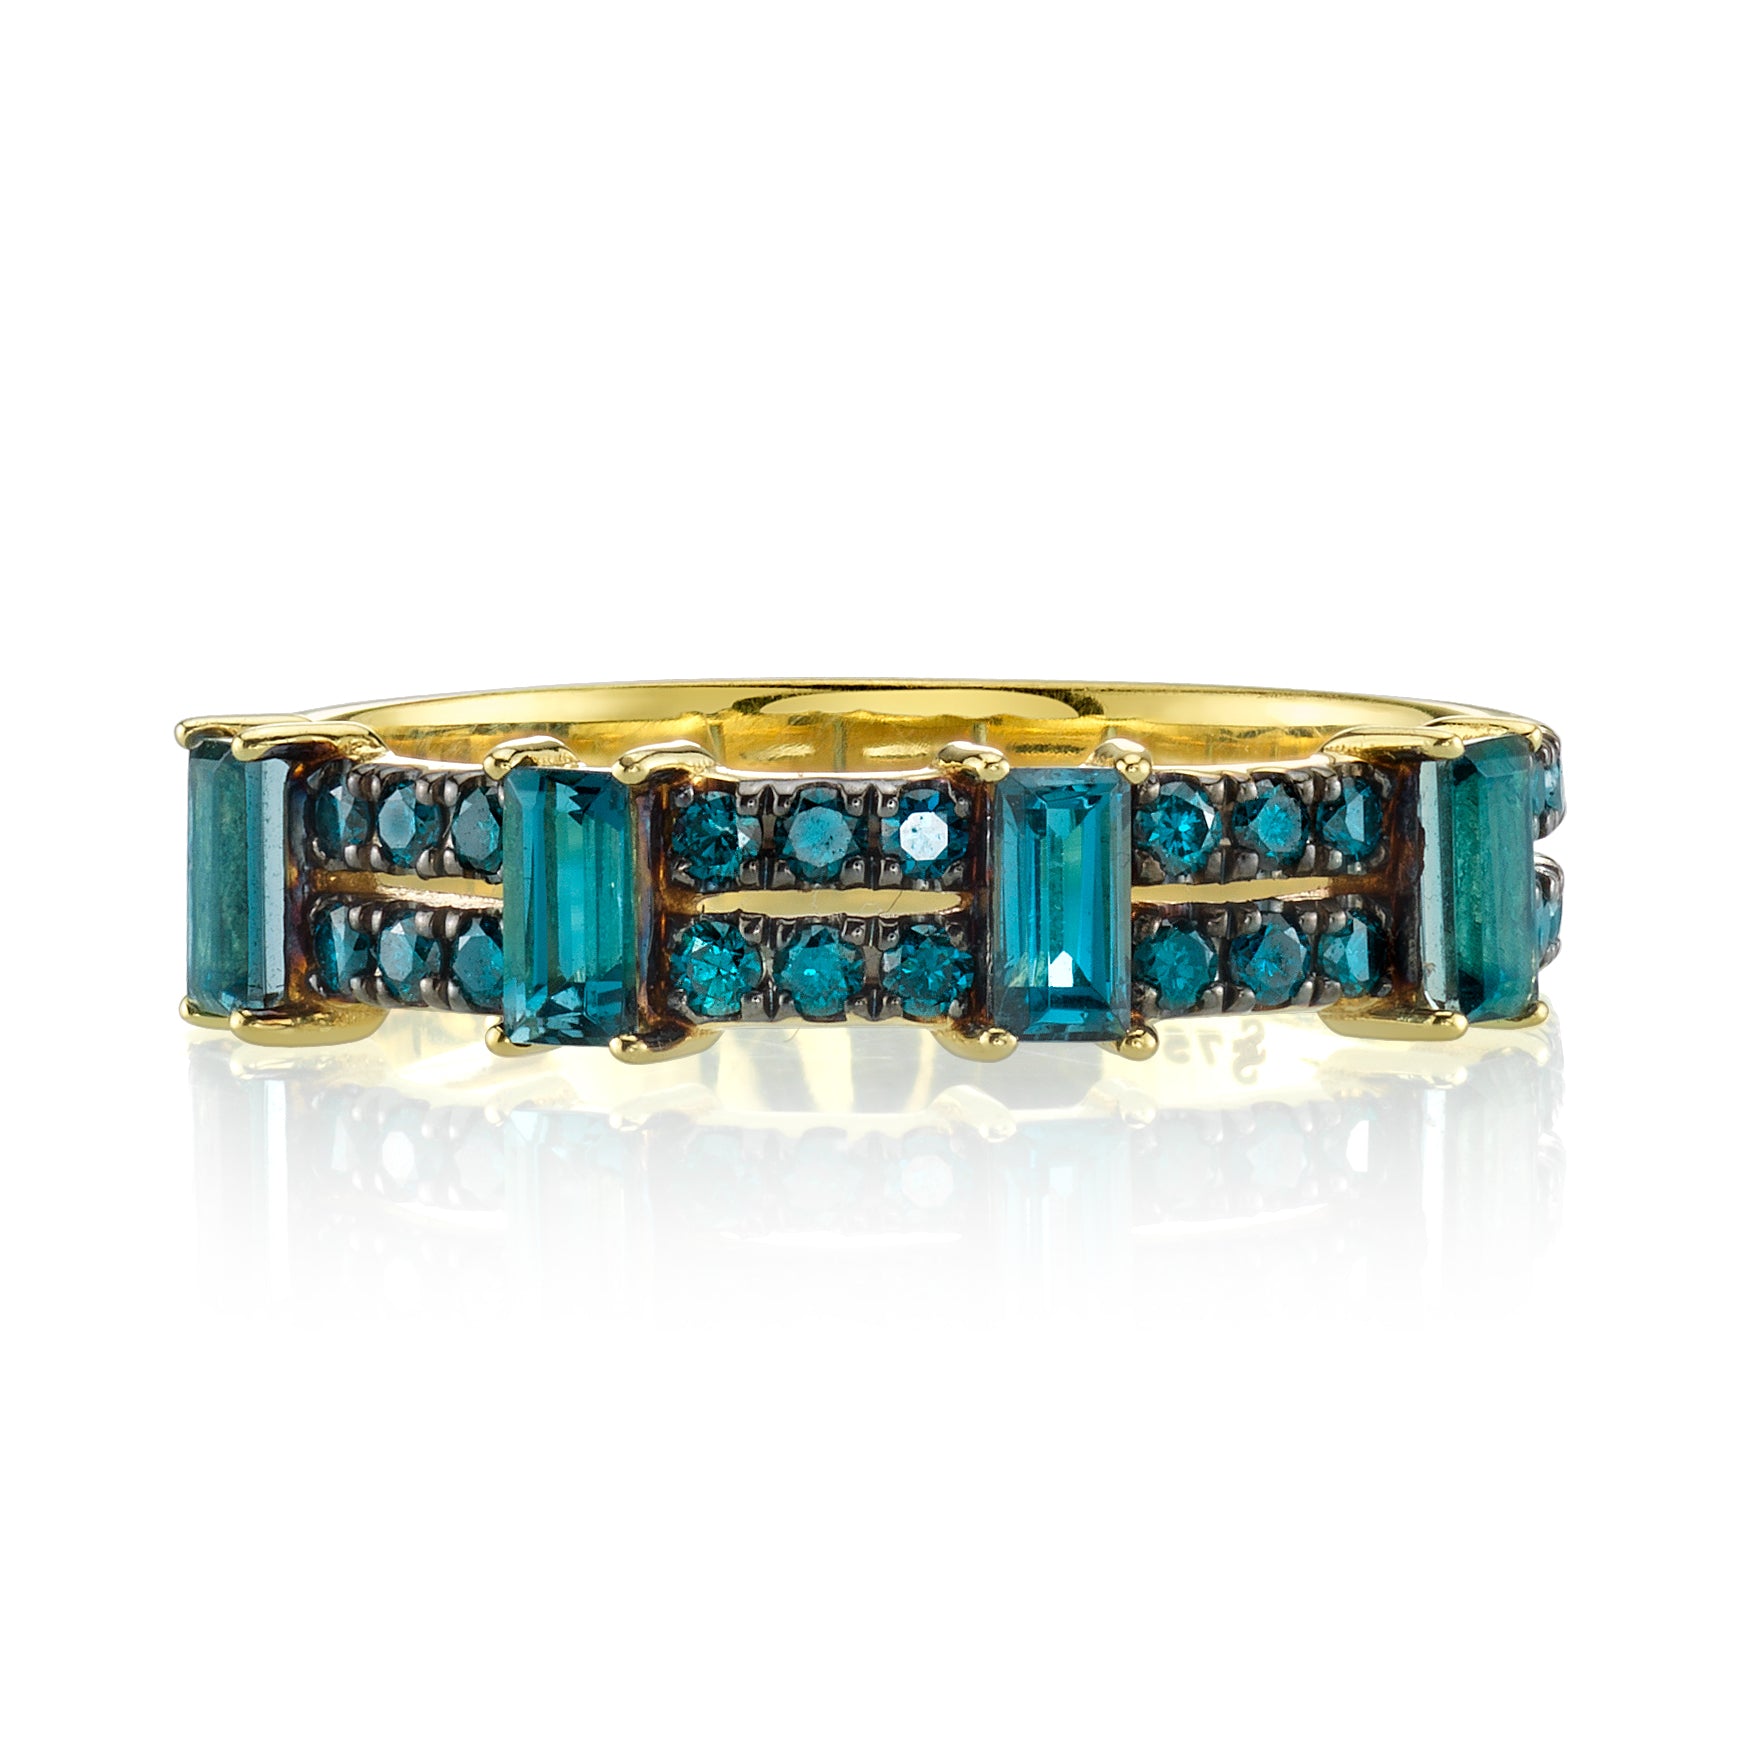 Band with Turquoise Baguettes and White Diamond Detail